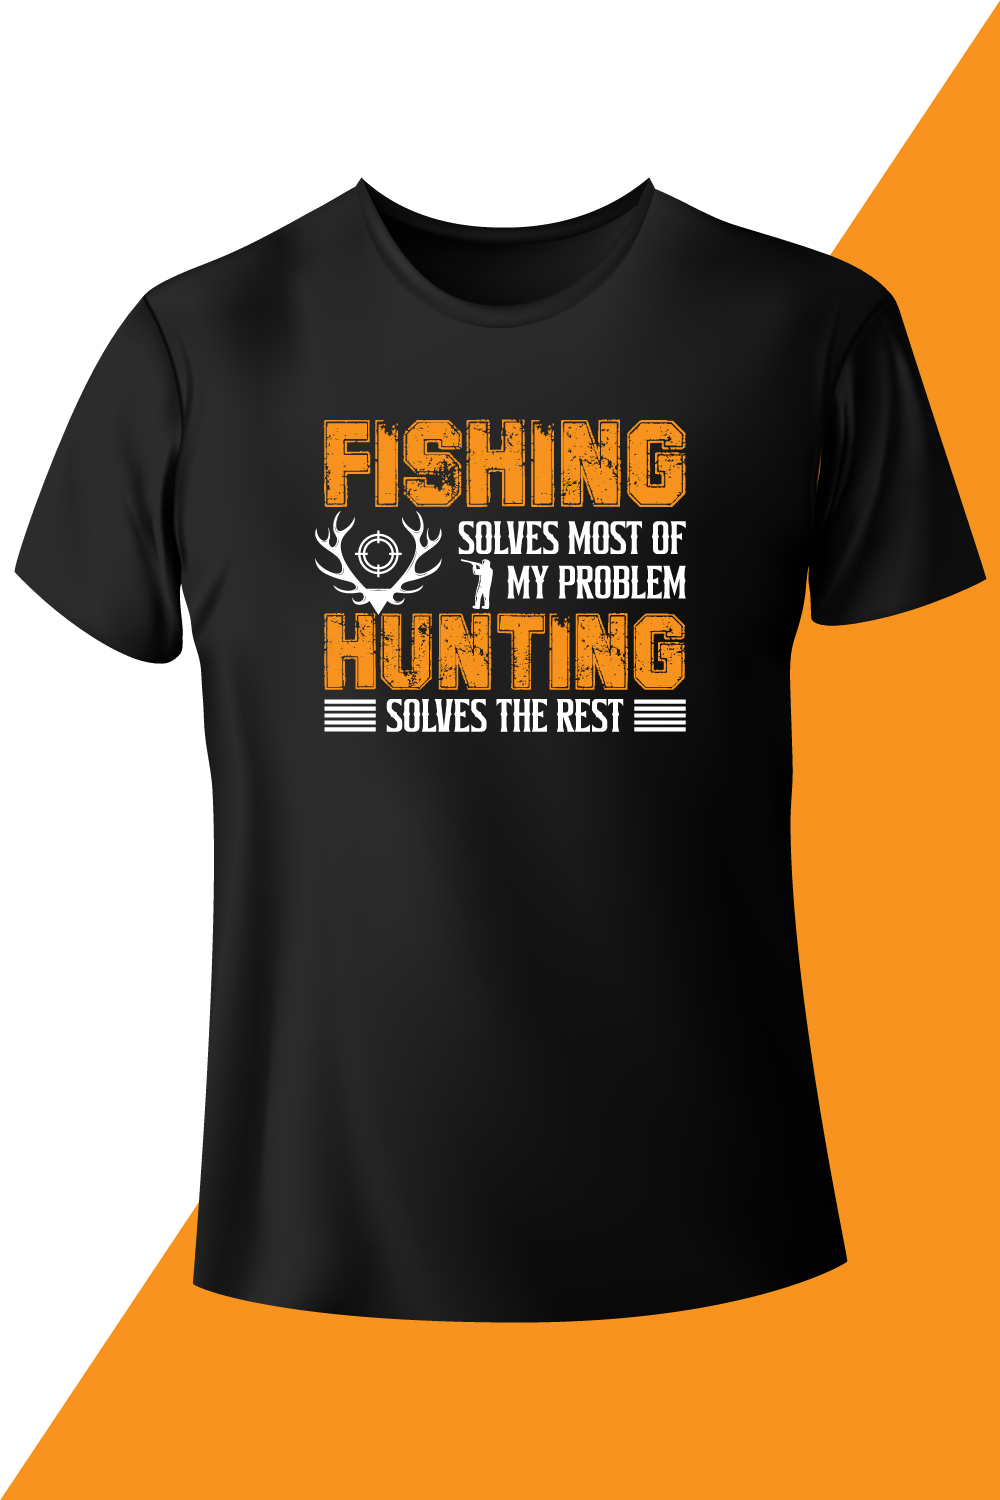 Image of a black t-shirt with a beautiful print on the theme of hunting and fishing.